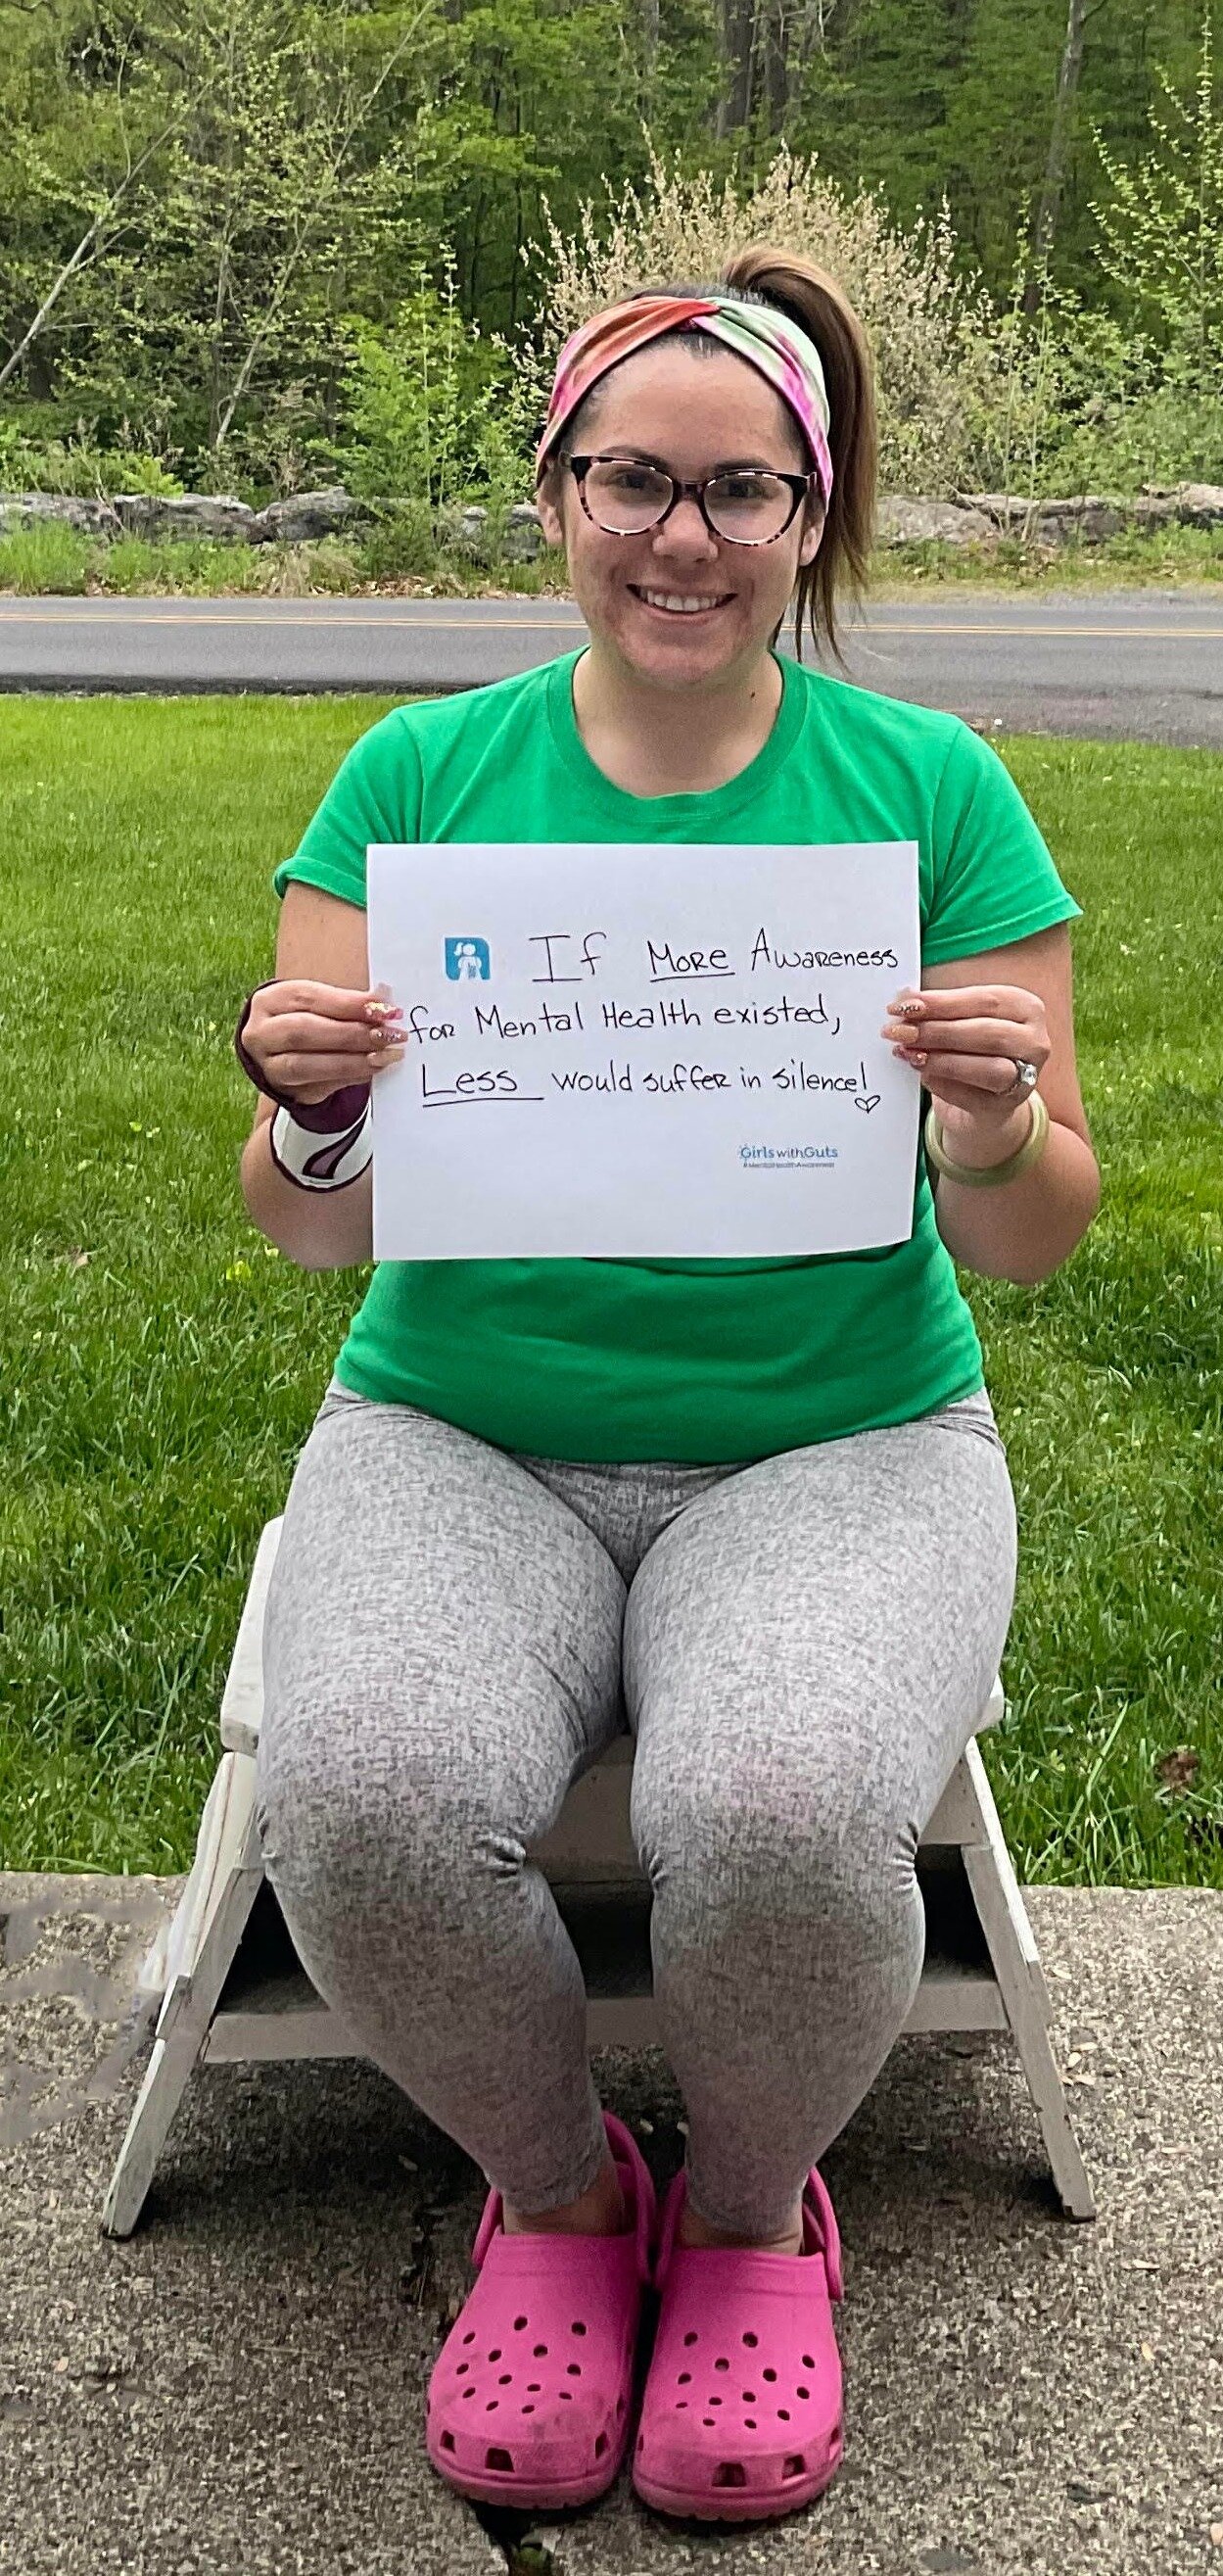 Image of a woman (Nina) outside holding a sign that says, "If more awareness for mental health existed, less would suffer in silence!"